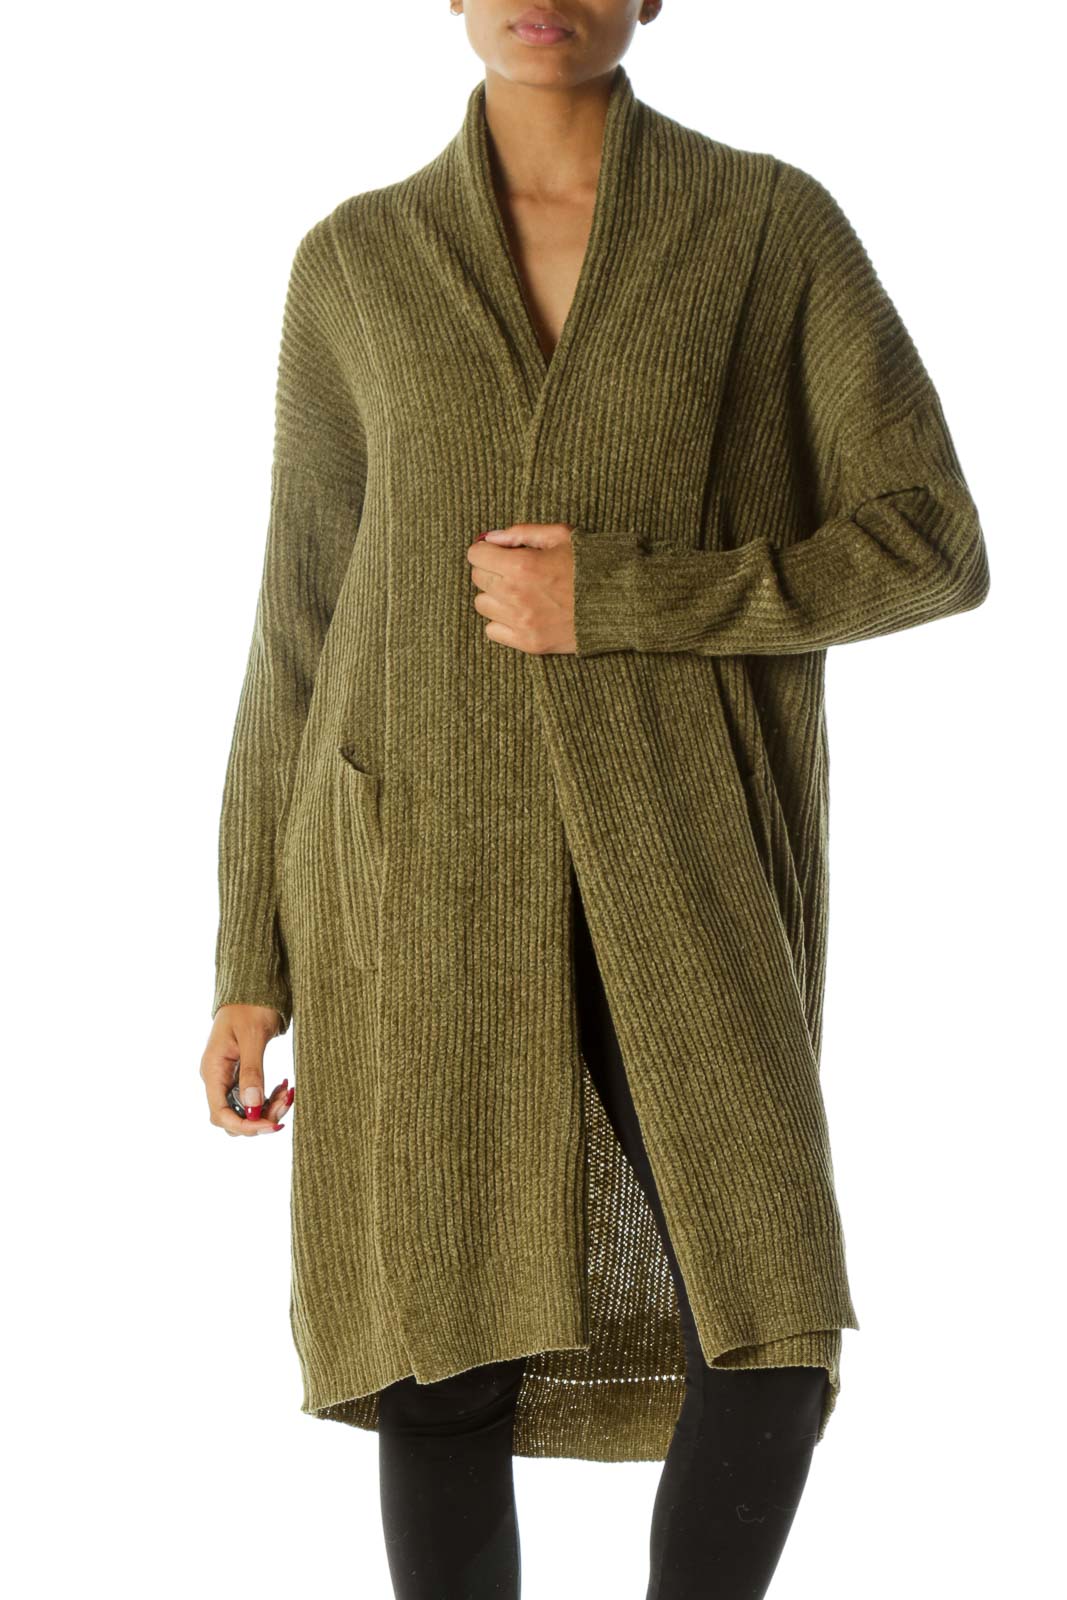 Green Ribbed Knit Open Pocketed Long Sleeve Chunky Cardigan Front